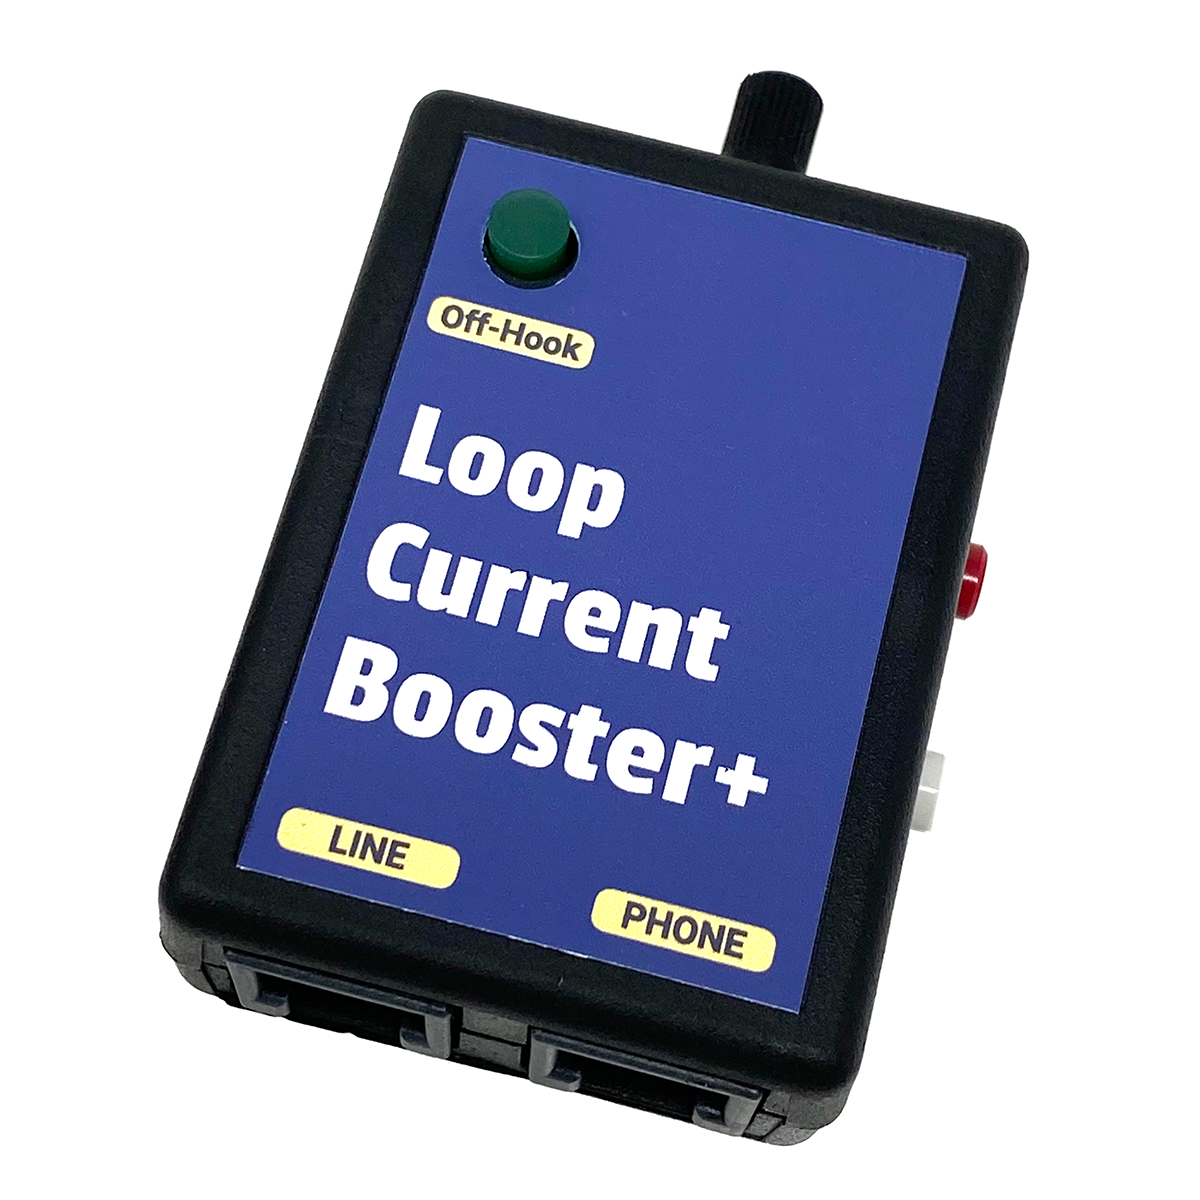 Loop Current Booster+ (Top View)